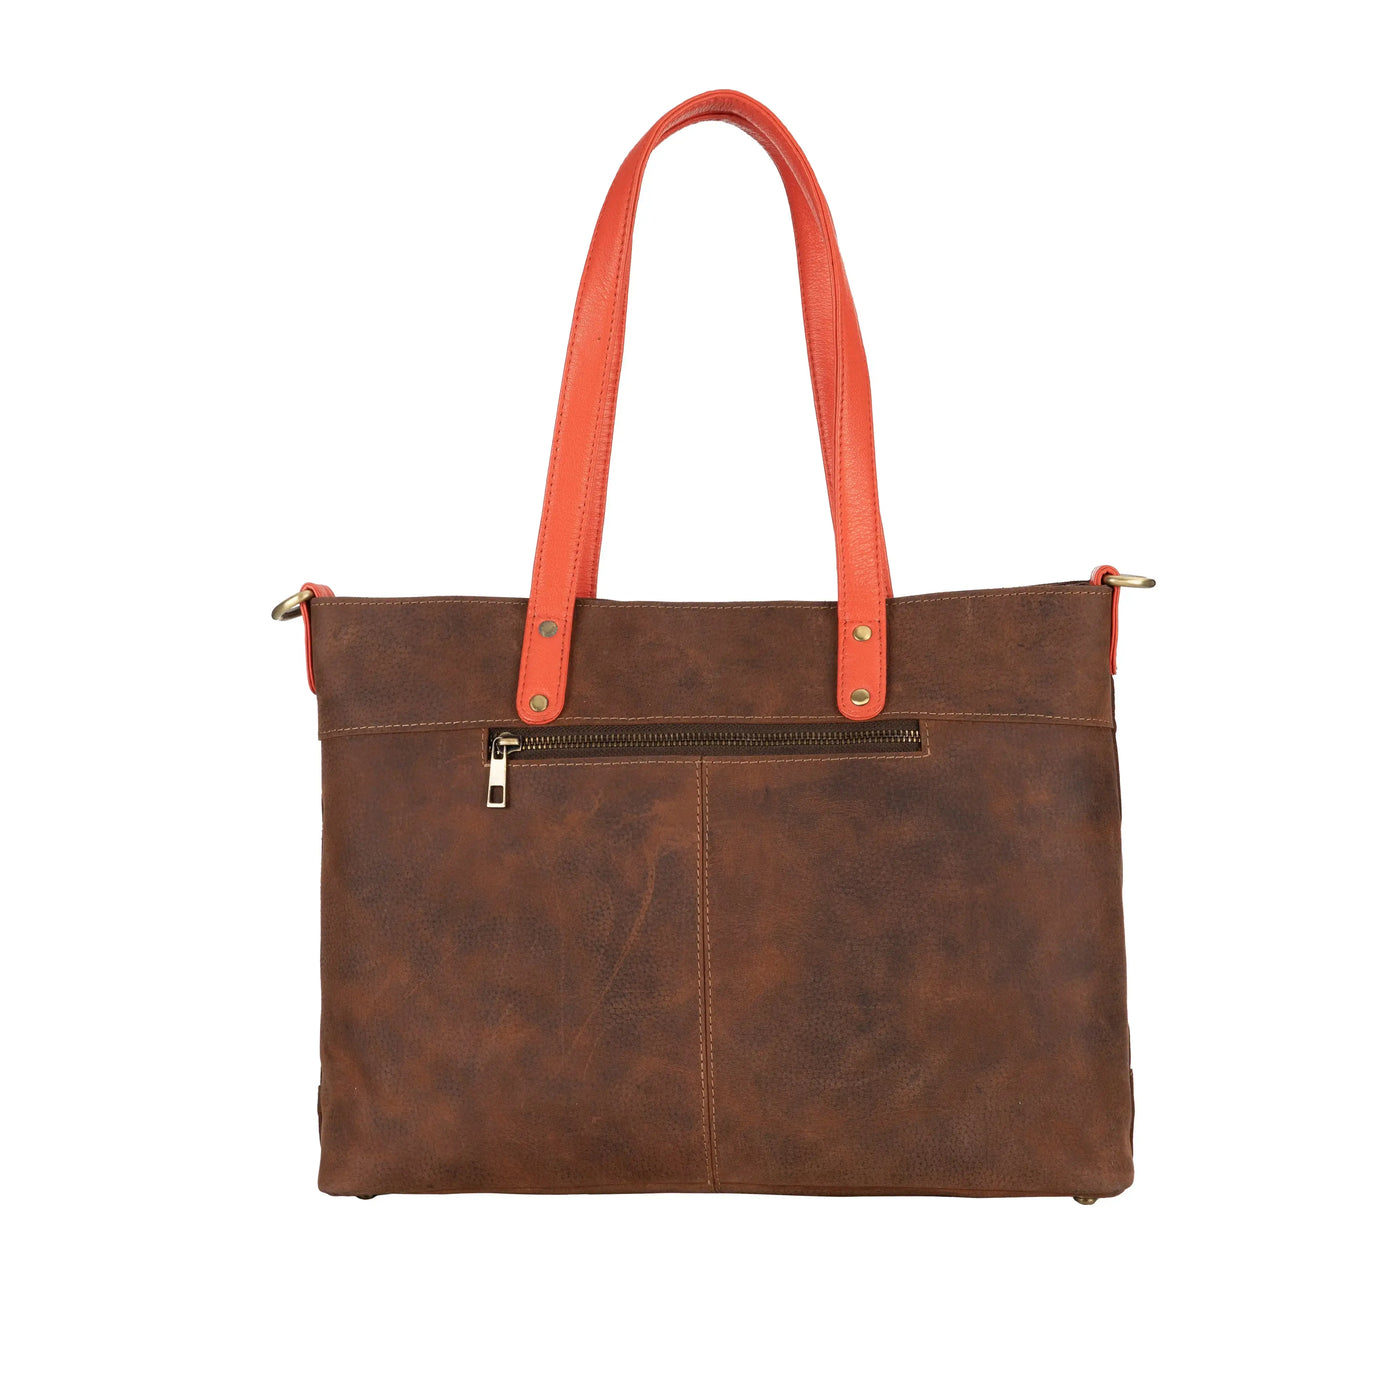 Astird Tote freeshipping - Sixth Edition